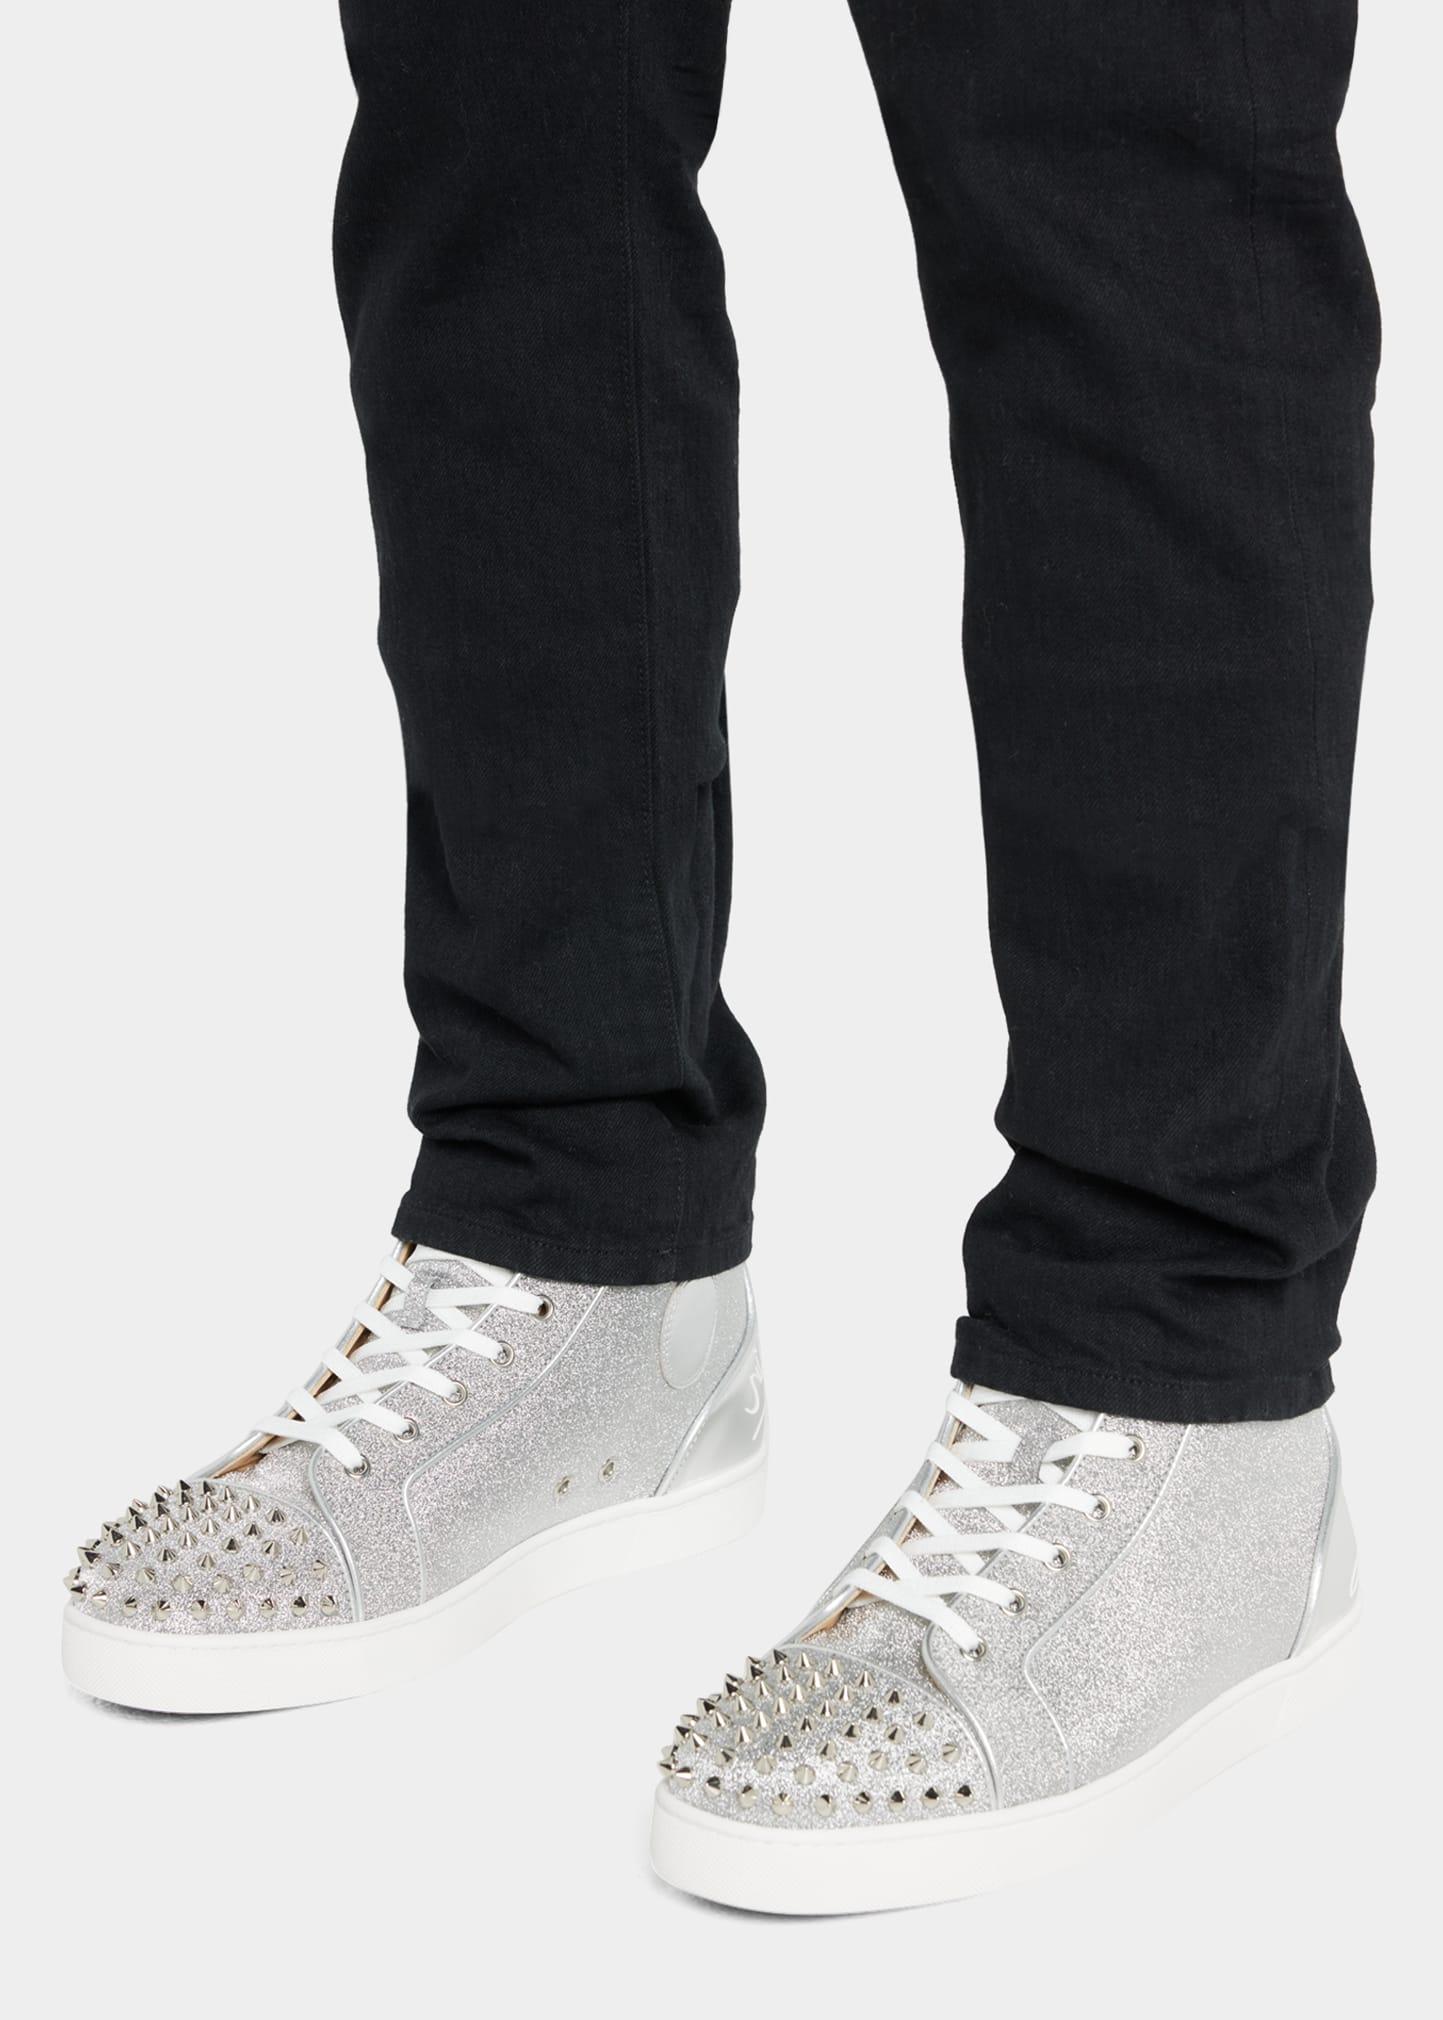 Lou Spikes woman - High-top sneakers - Specchio leather and glittered calf  leather - Silver - Christian Louboutin